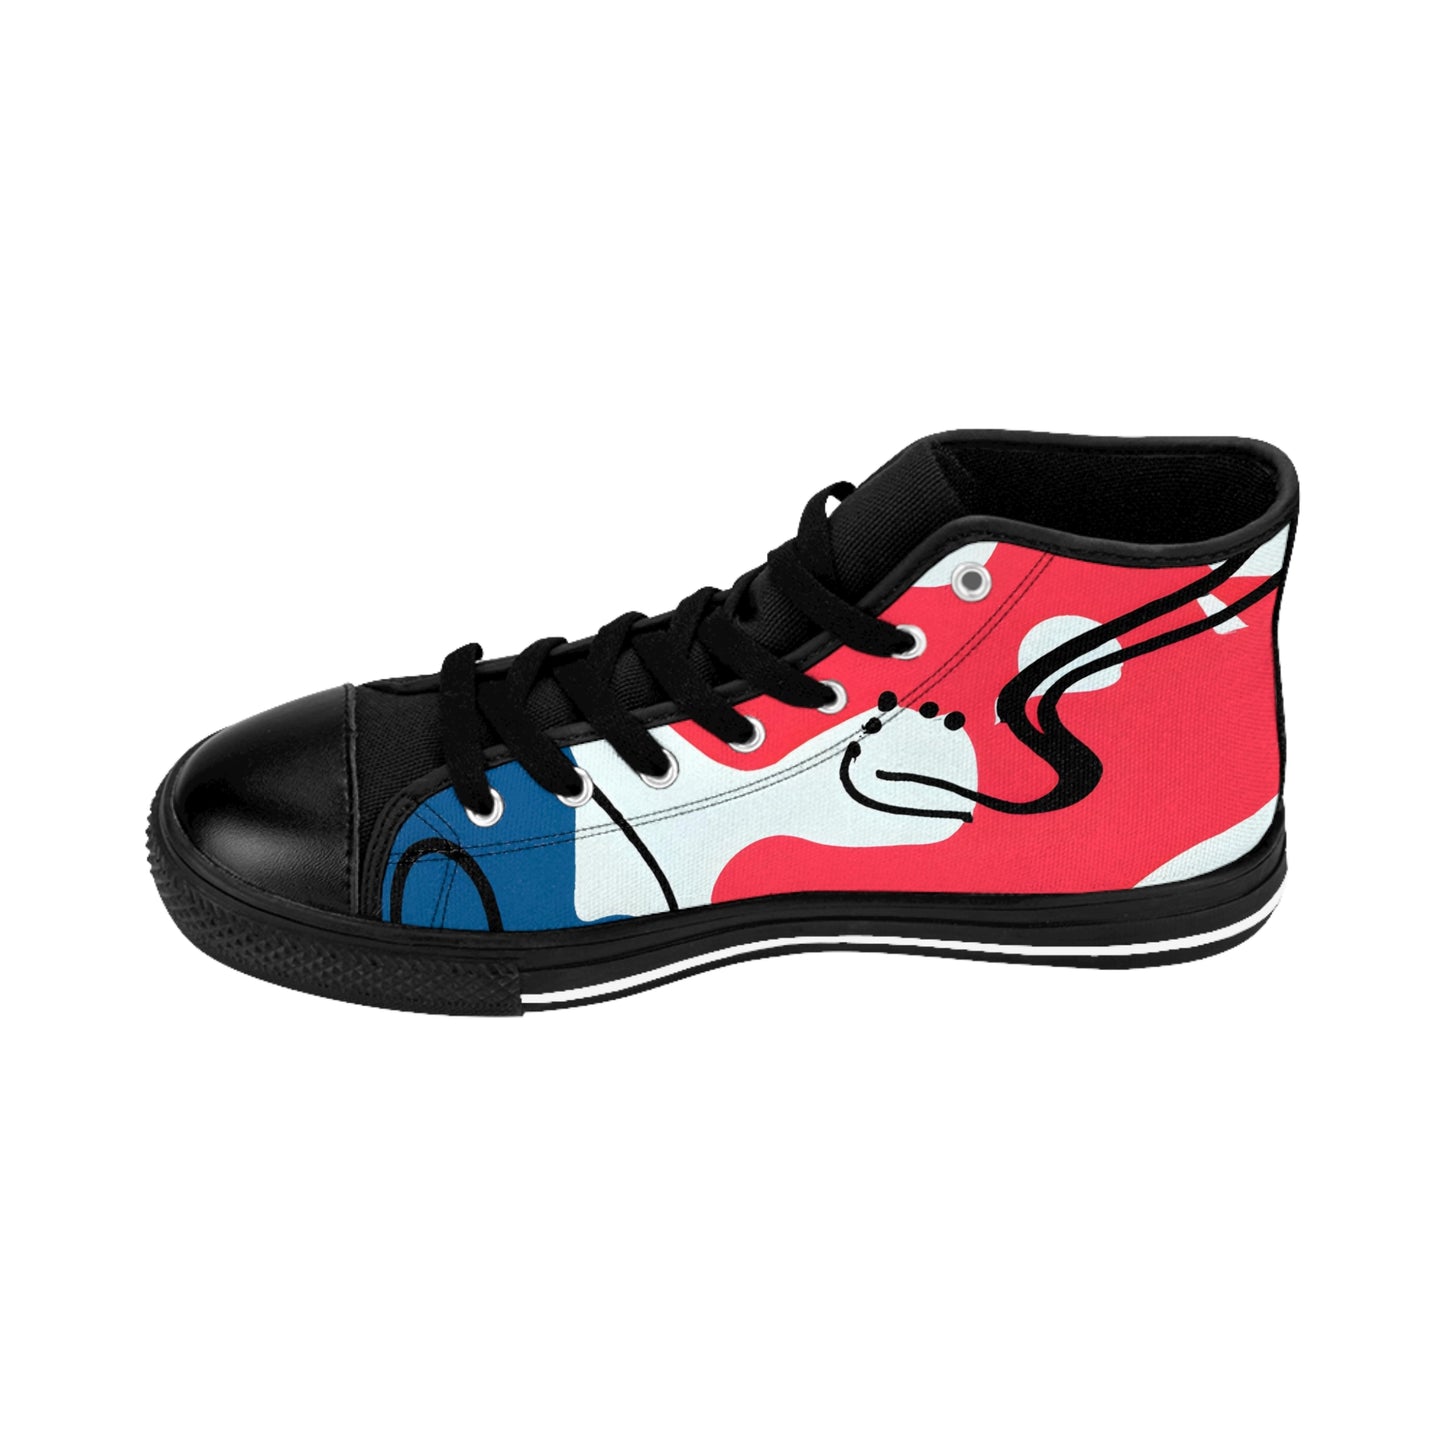 Manitou Winston - Women's Classic HIgh-Top Sneakers